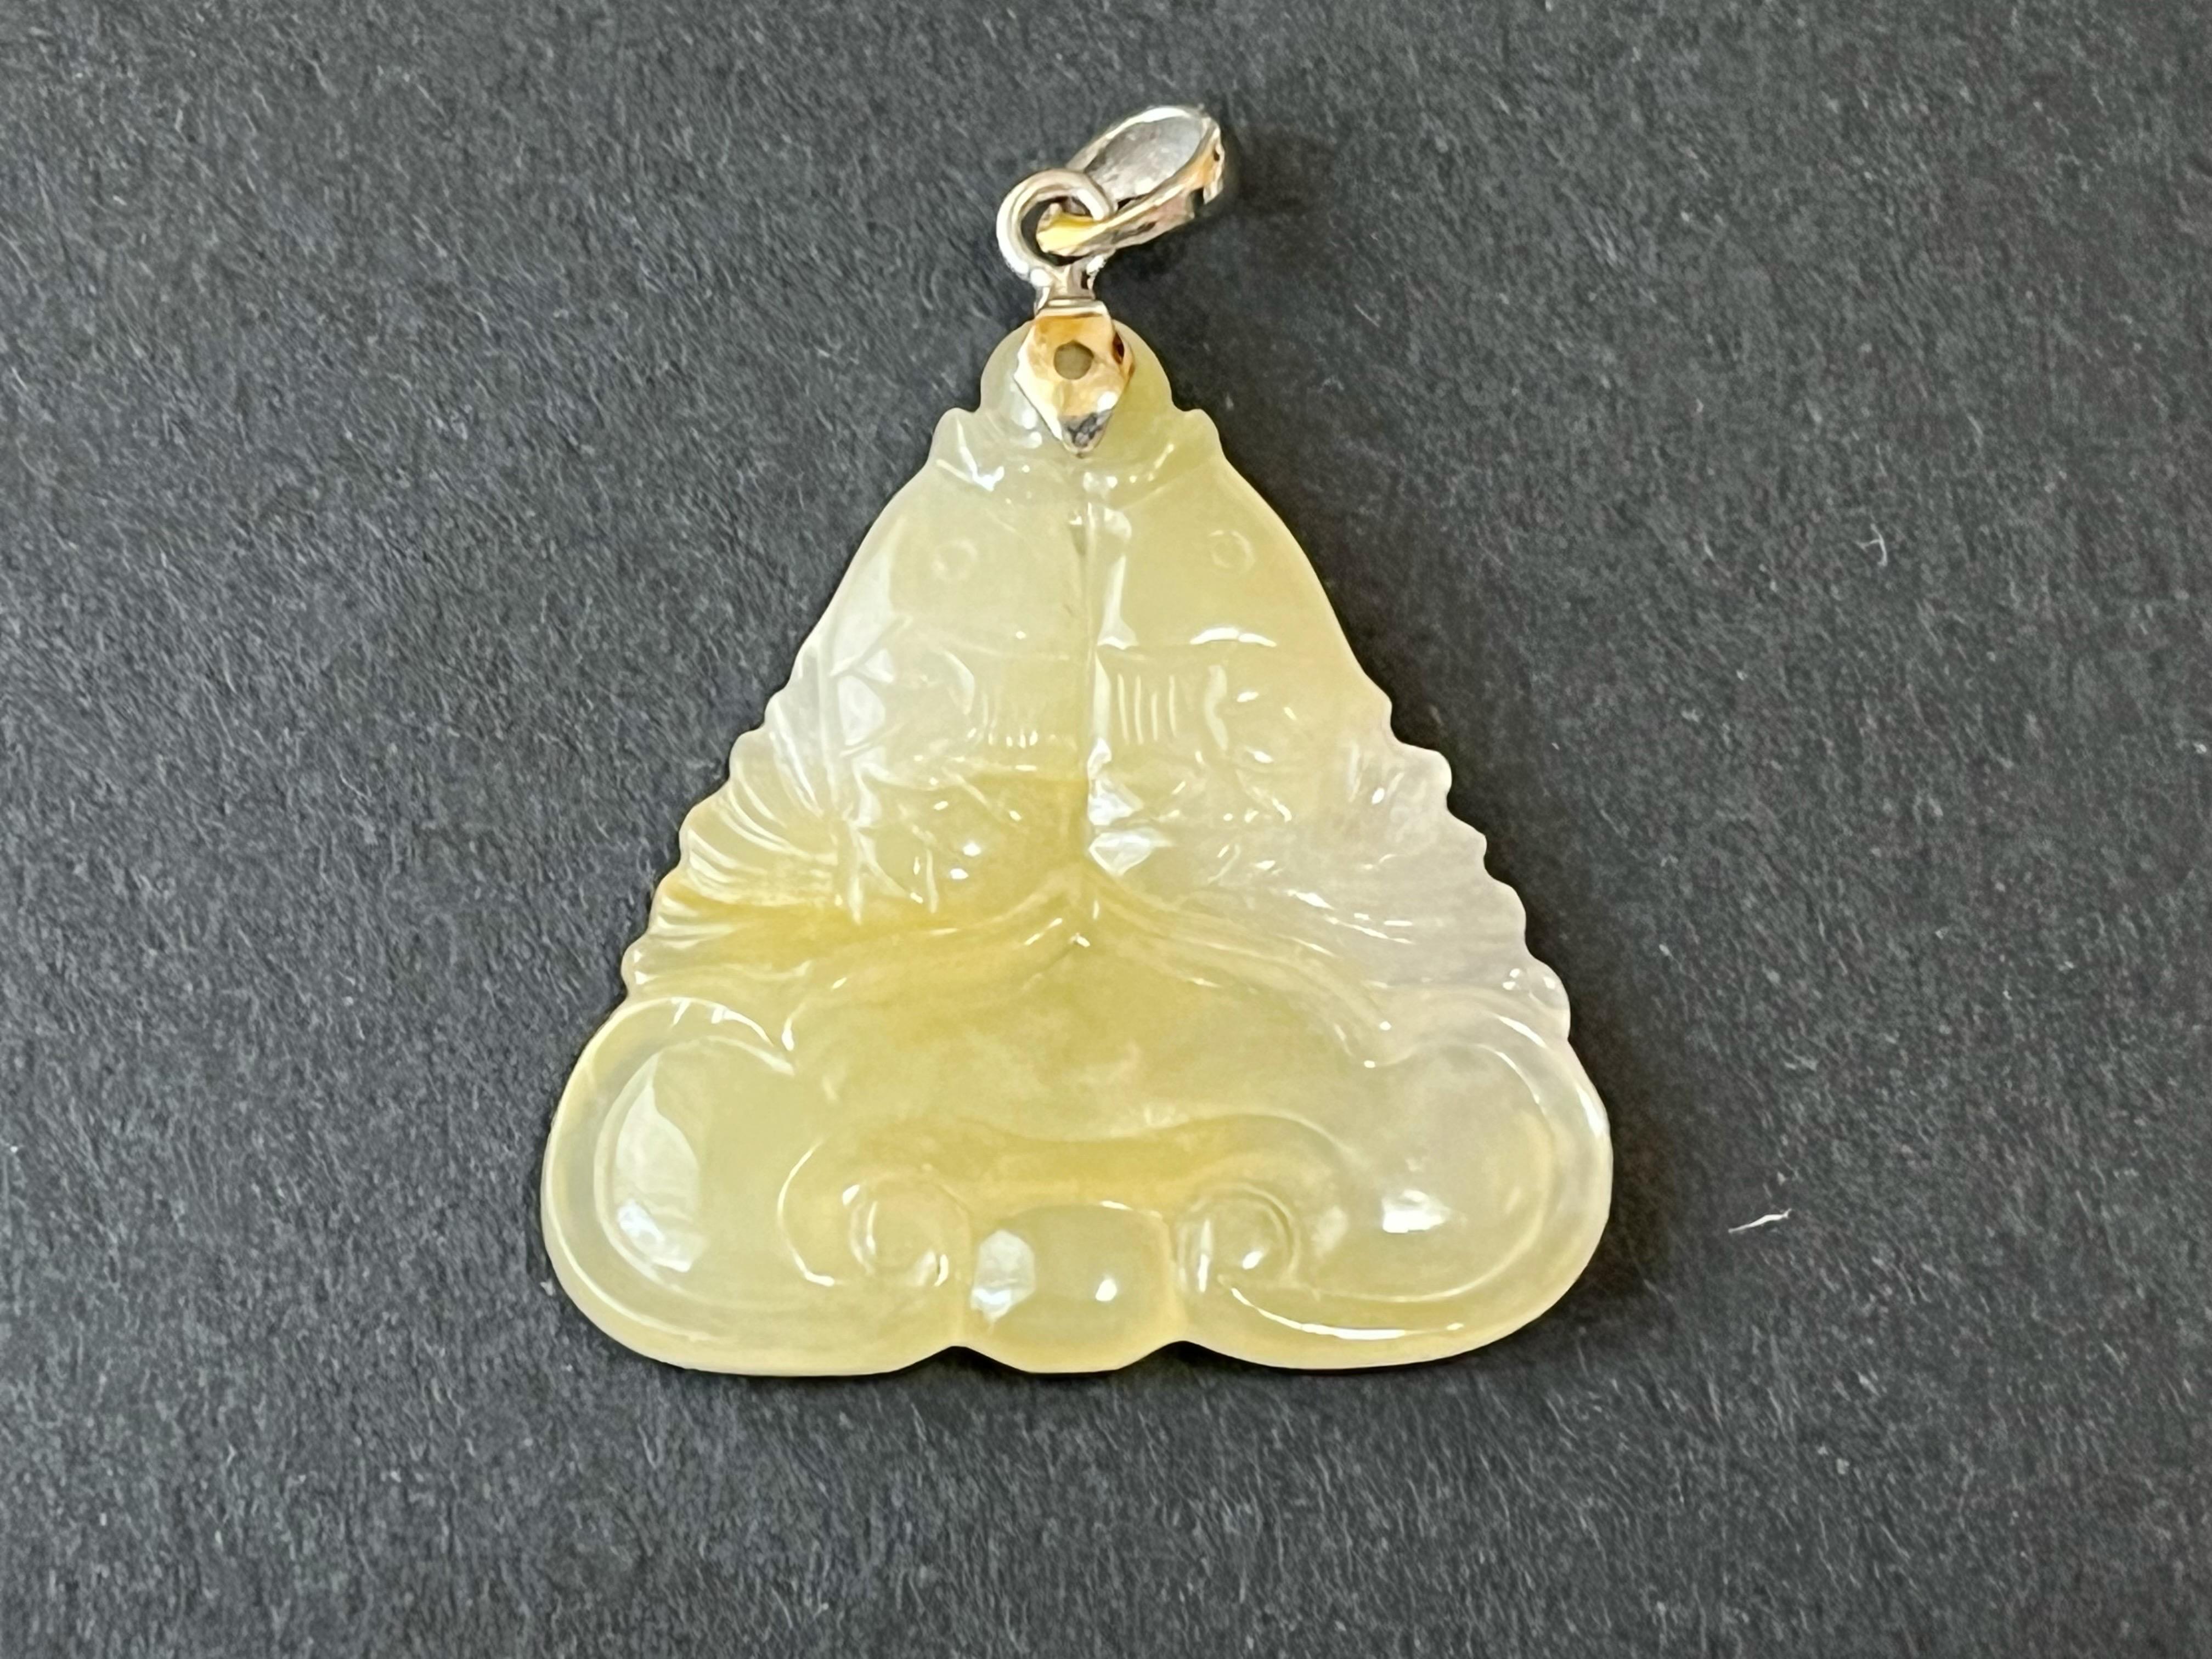 Introducing a stunning high-quality translucent icy jade Pisces pendant that is sure to captivate your heart. This exquisite piece features a beautifully carved Pisces fish motif.  Crafted from the finest quality translucent icy jade, this pendant